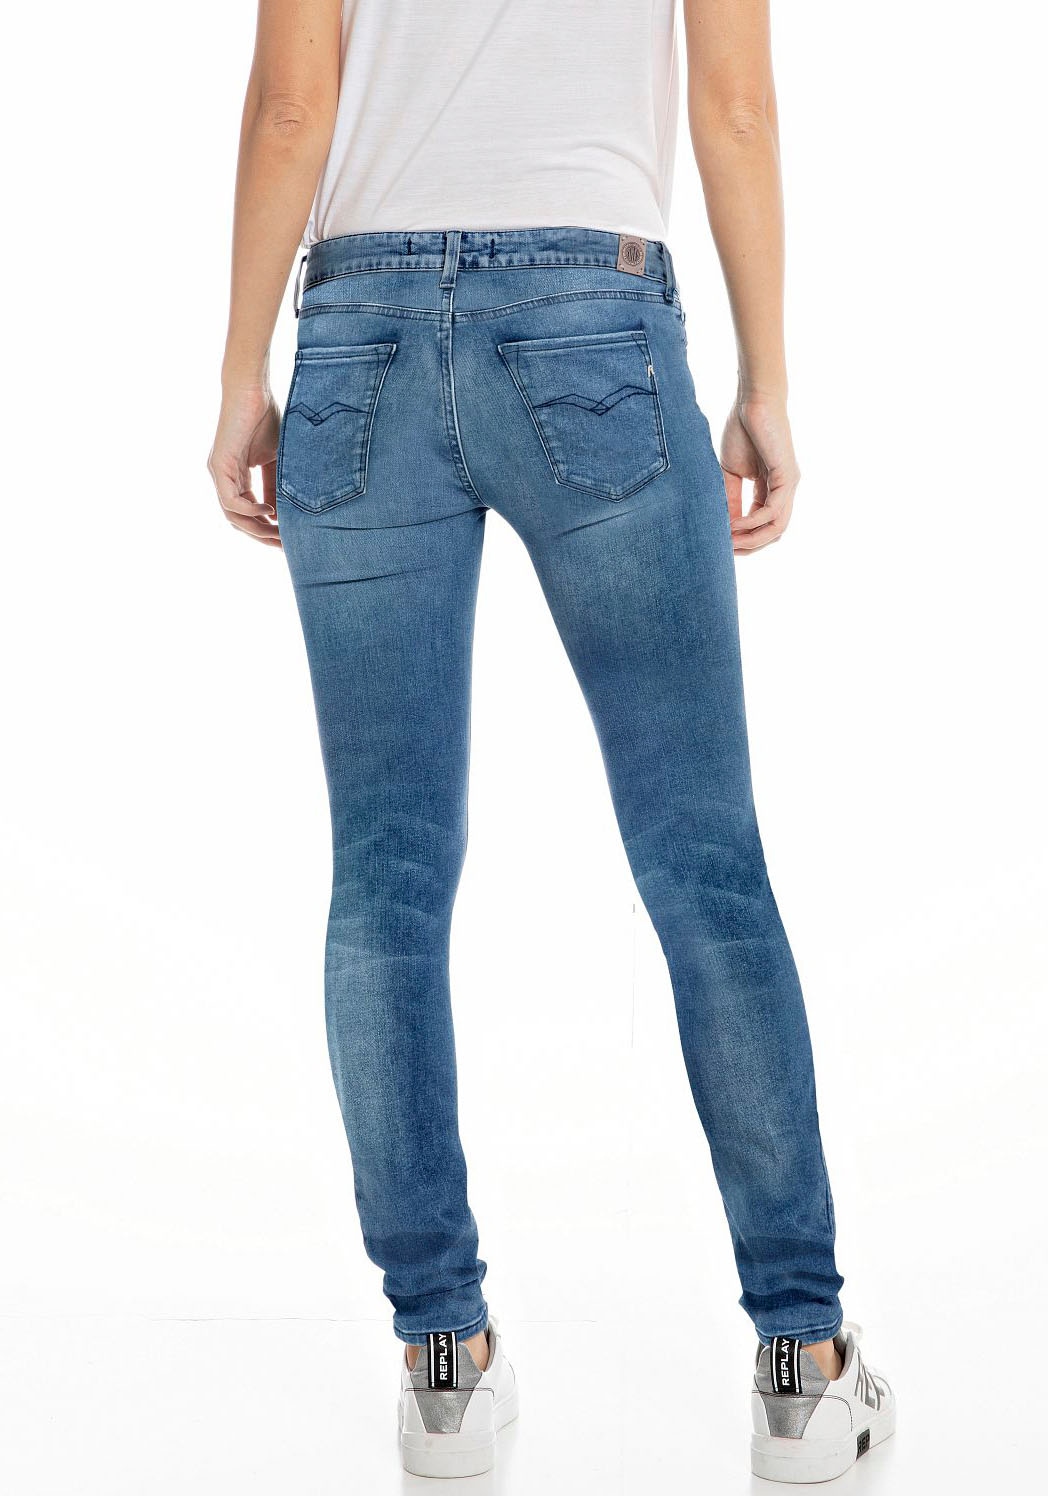 LUZ«, Skinny-fit-Jeans online »NEW kaufen Ankle-Länge Replay in